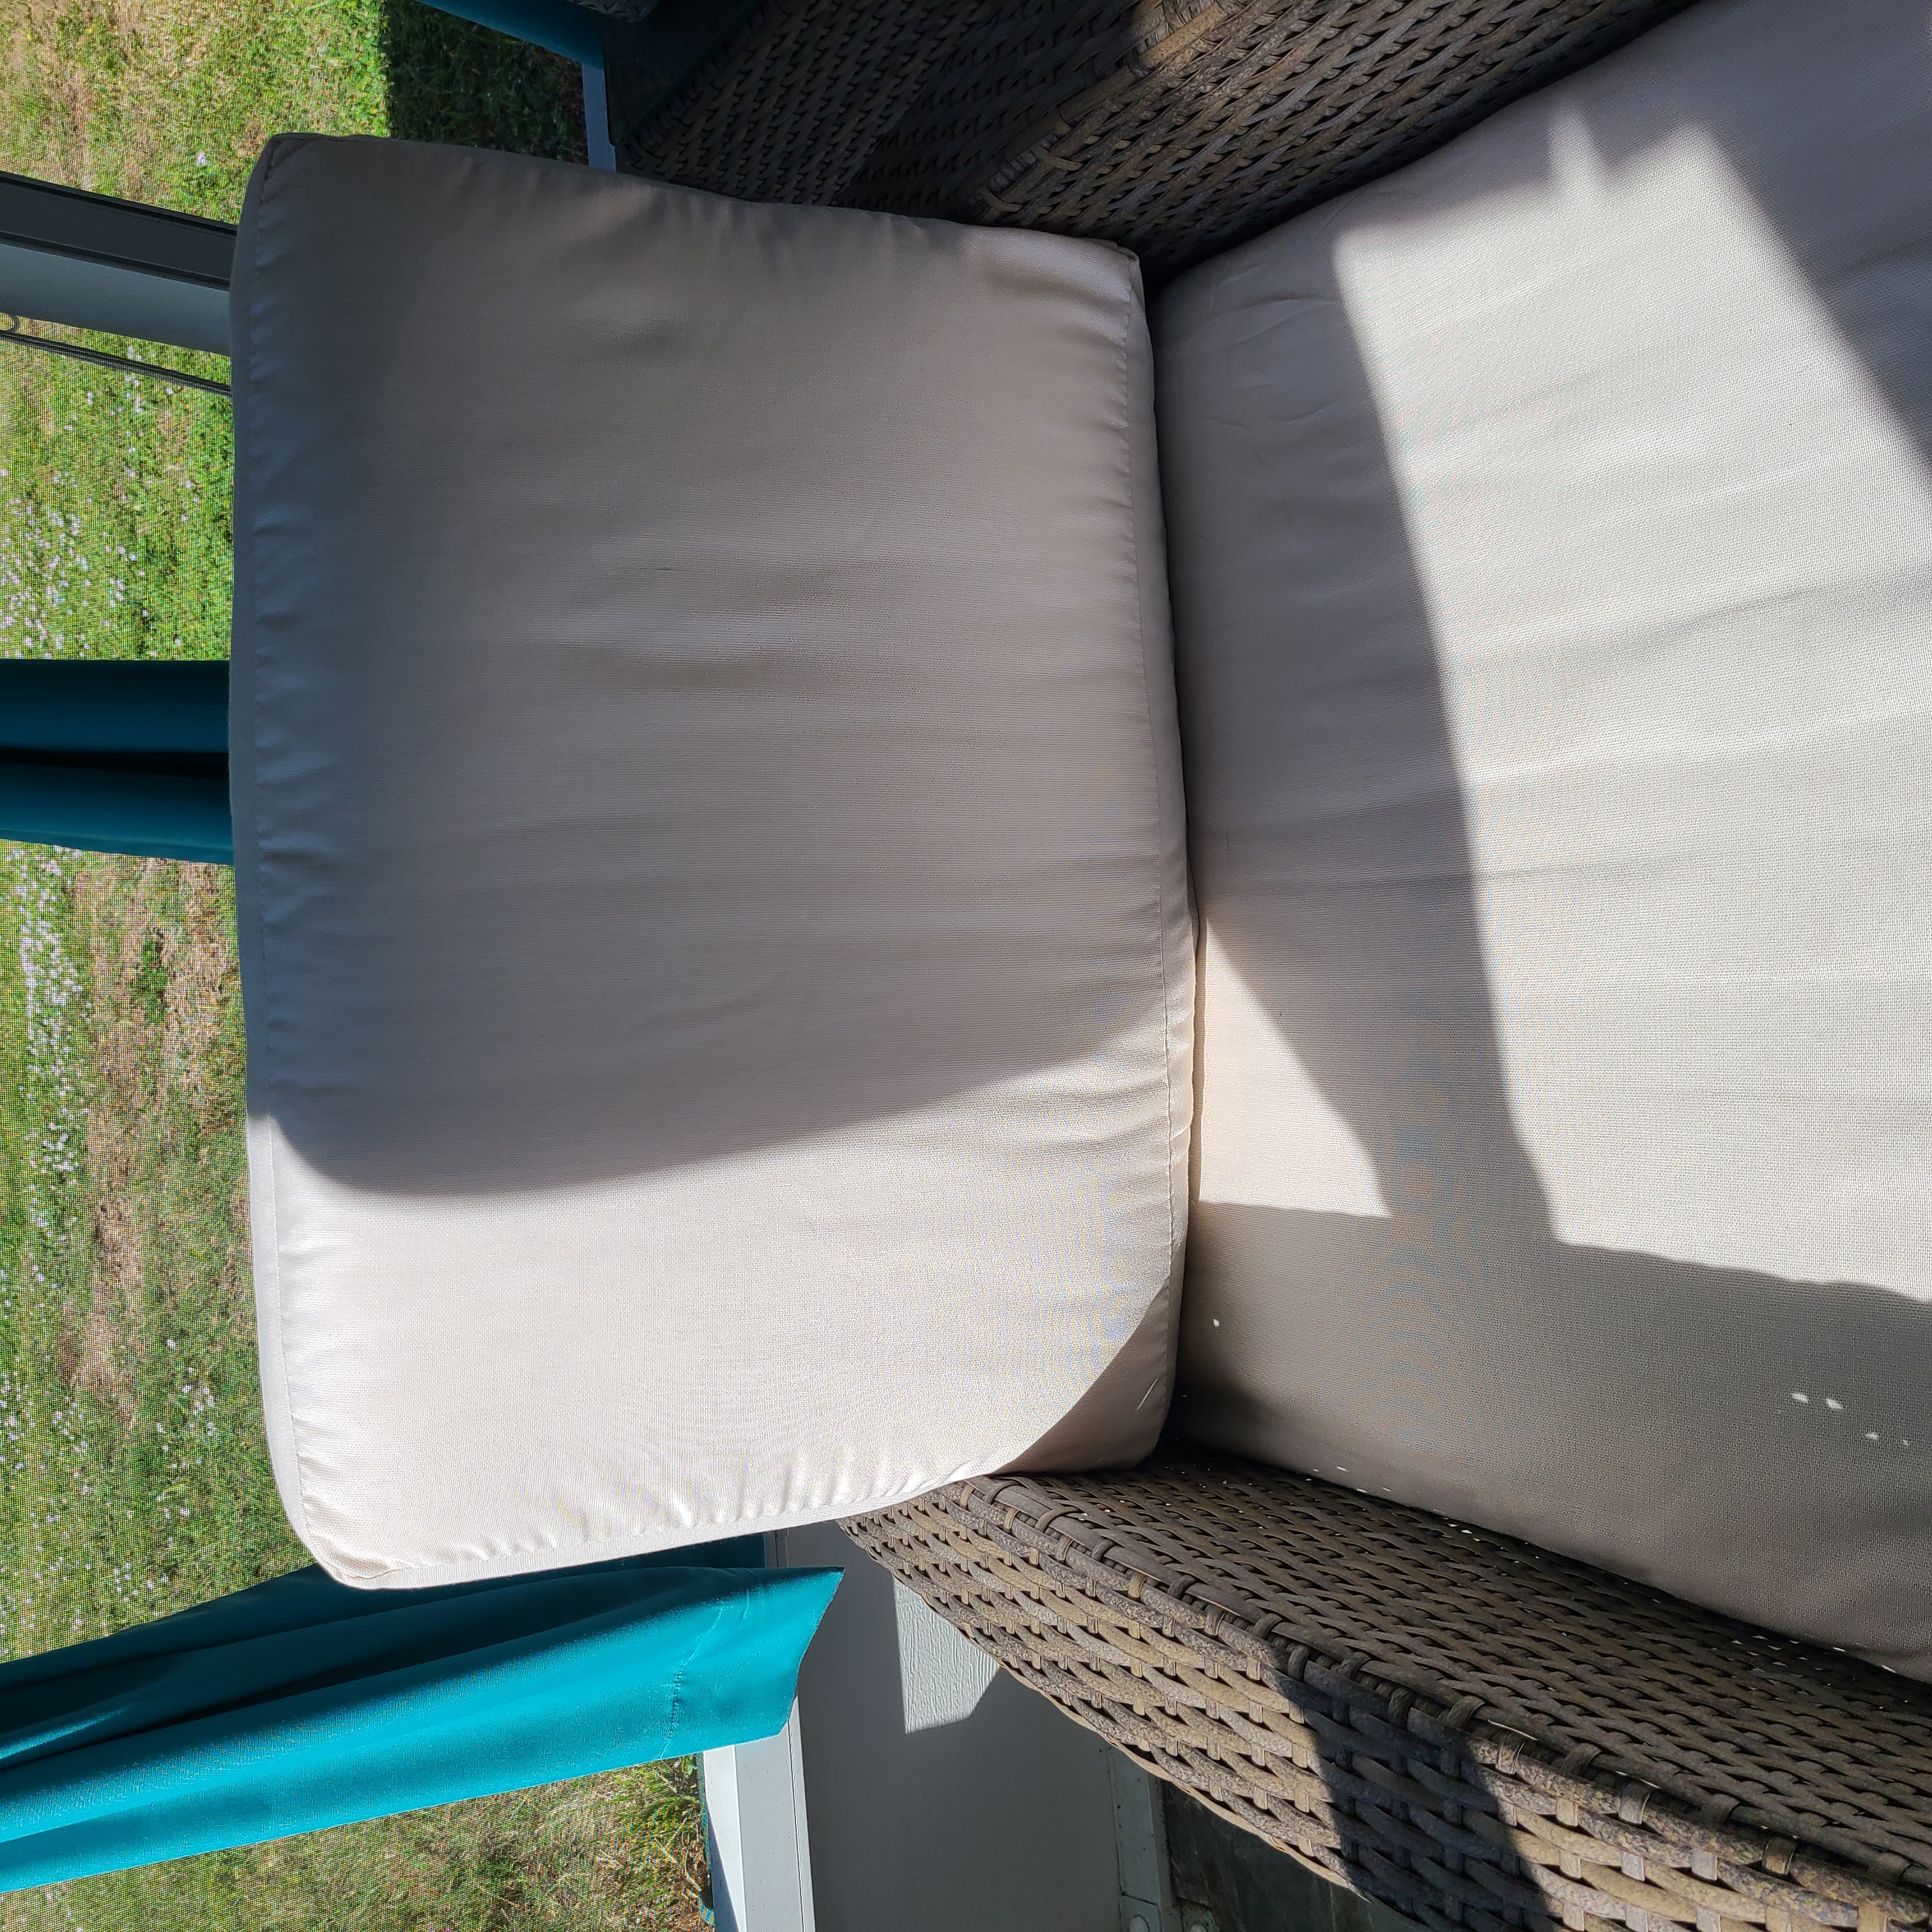 SOFA CUSHIONS - BEDS - OUTDOOR HQ SEATING FOAM CUT TO SIZE ANY SHAPE /  THICKNESS